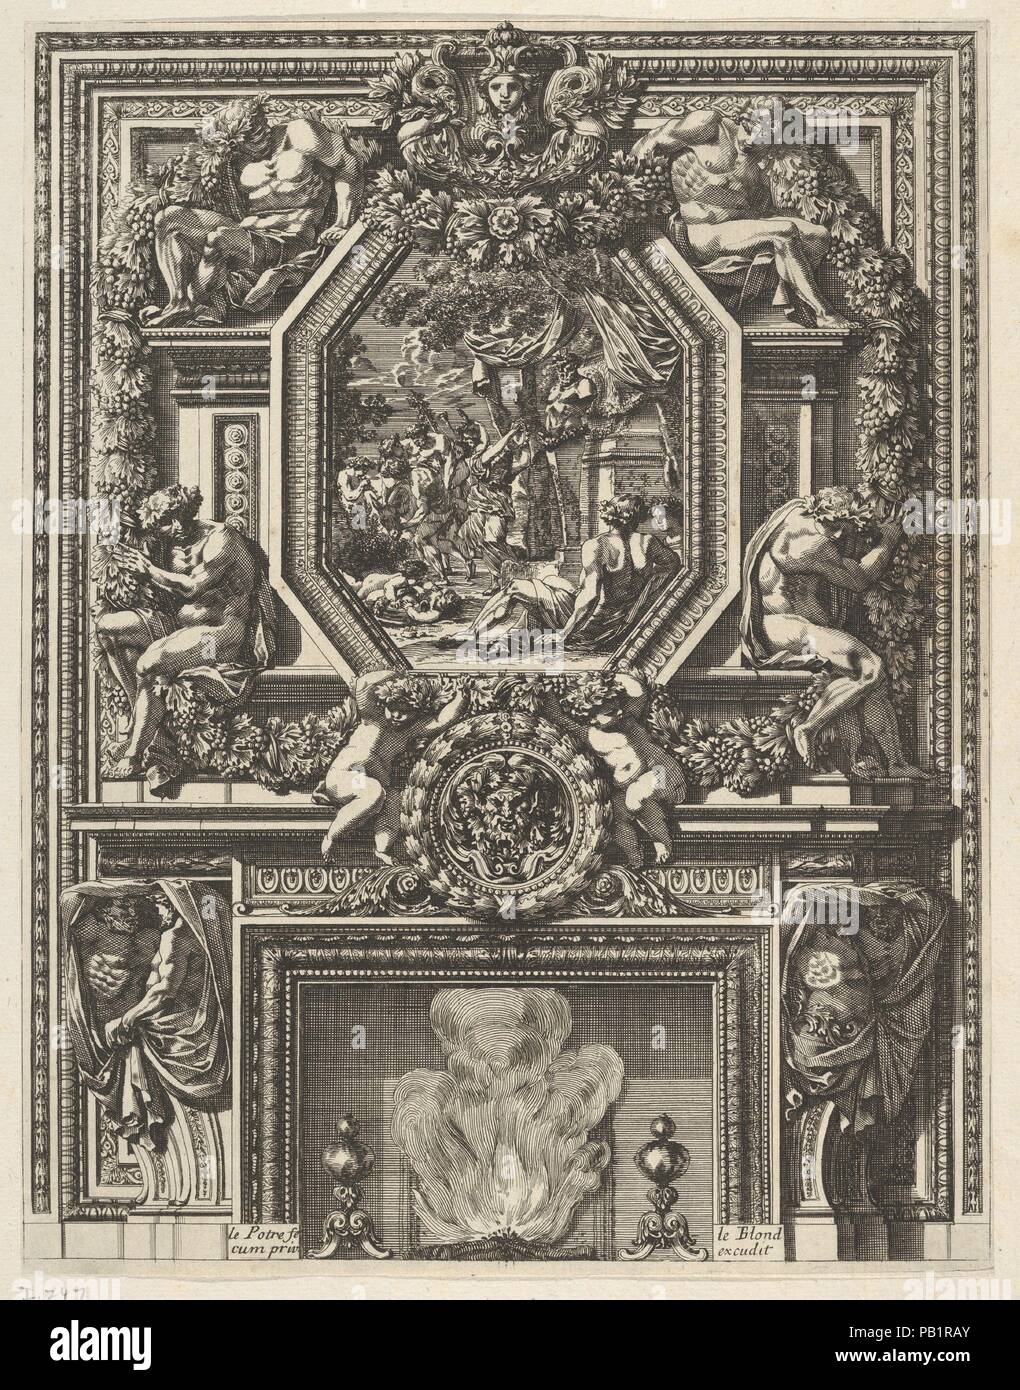 Chimney with a Bacchanal over the Mantle from 'Grandes Cheminée'. Artist  and engraver: Jean Le Pautre (French, Paris 1618-1682 Paris). Dimensions:  Sheet: 10 15/16 × 8 7/16 in. (27.8 × 21.5 cm) [